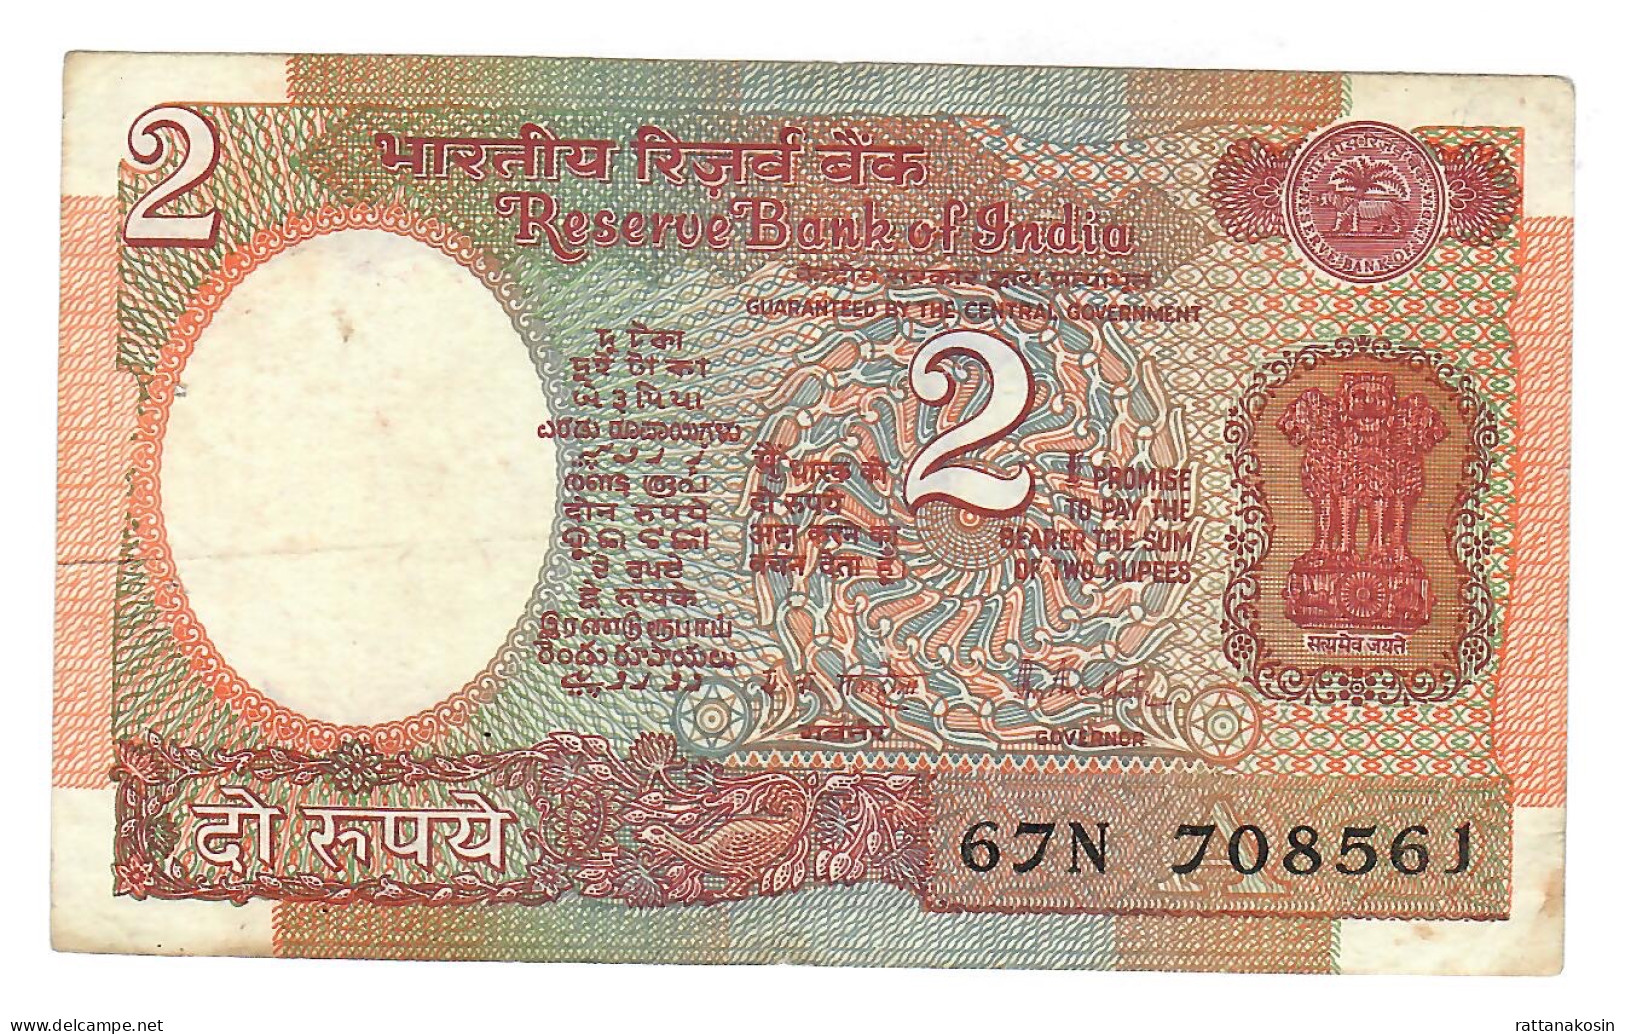 INDIA P79a2 2 RUPEES 1985-1990 Signature 15 LETTER A   VF - Indien